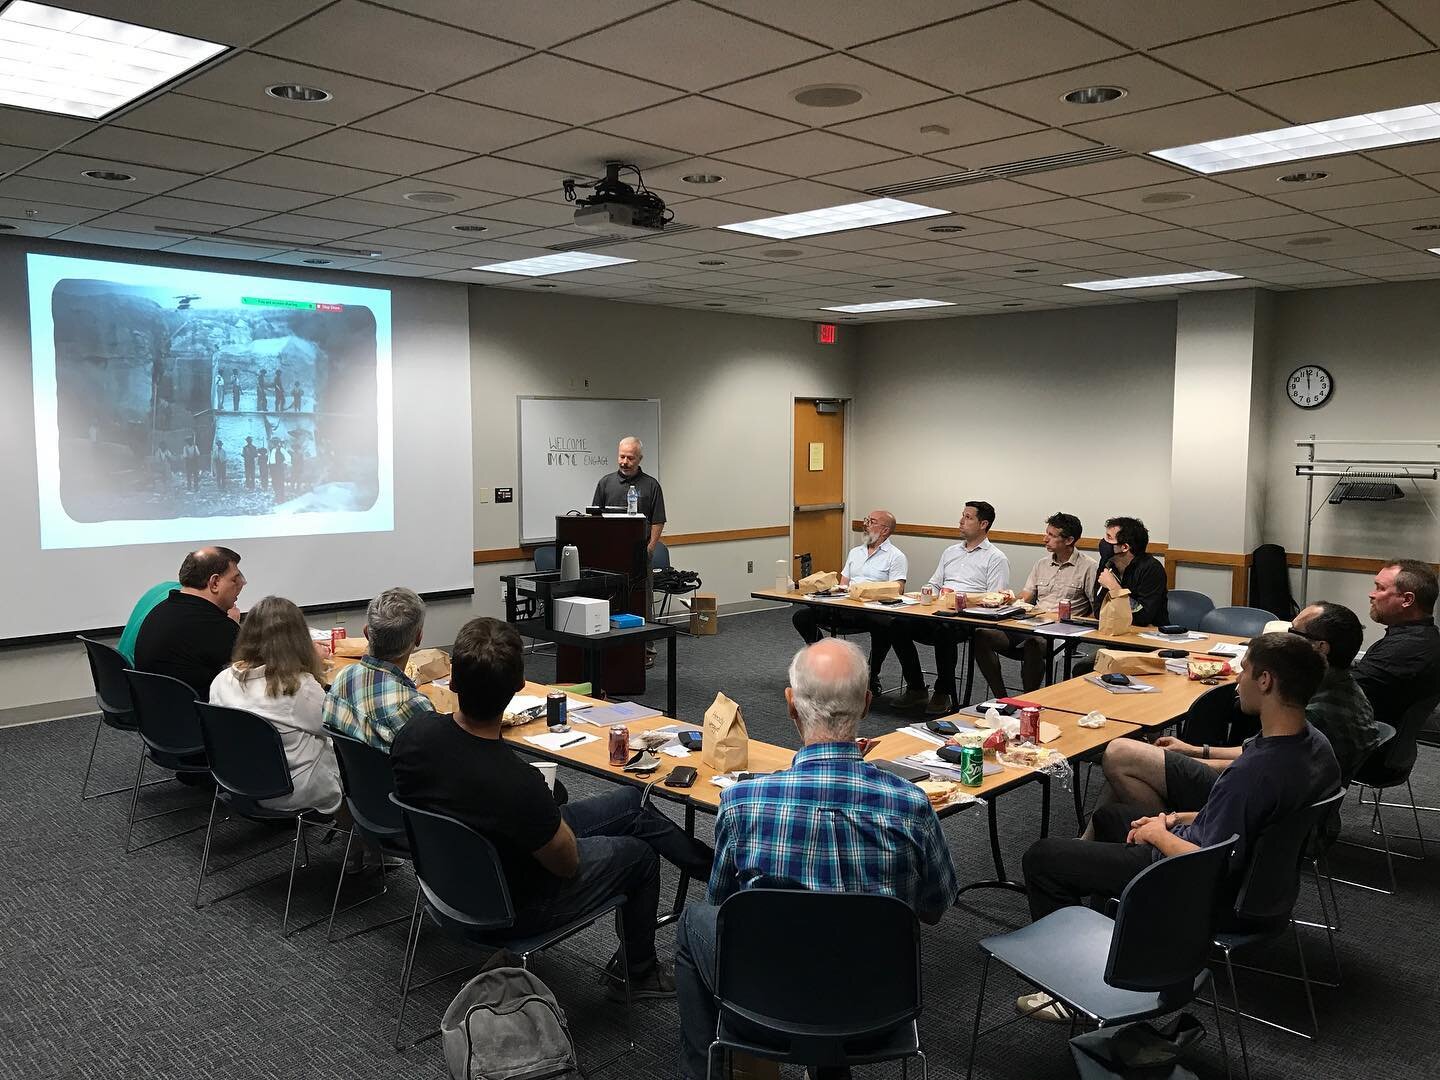 Great turnout for the first BAAC (Bloomington Area Architects Consortium) Lunch and Learn. Todd Schnatzmeyer from the Indiana Limestone Institute gave a great presentation on how to specify and detail limestone. Thanks to Tevin Norman at Texcon Cut S